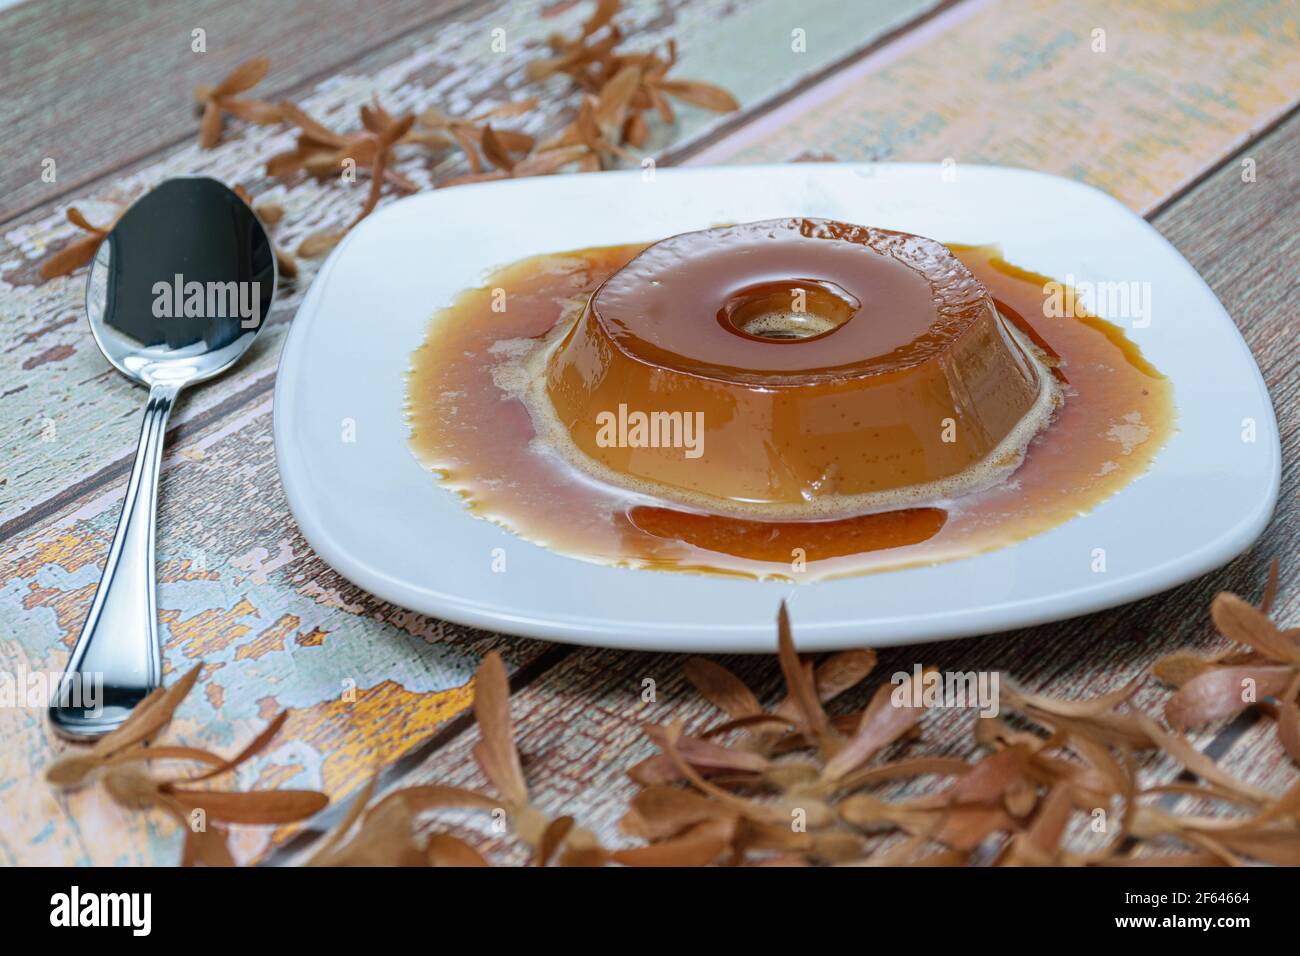 Dulce de leche pudding with caramel sauce, next to a spoon and flying seeds (Triplaris americana). A traditional Brazilian sweet. Stock Photo